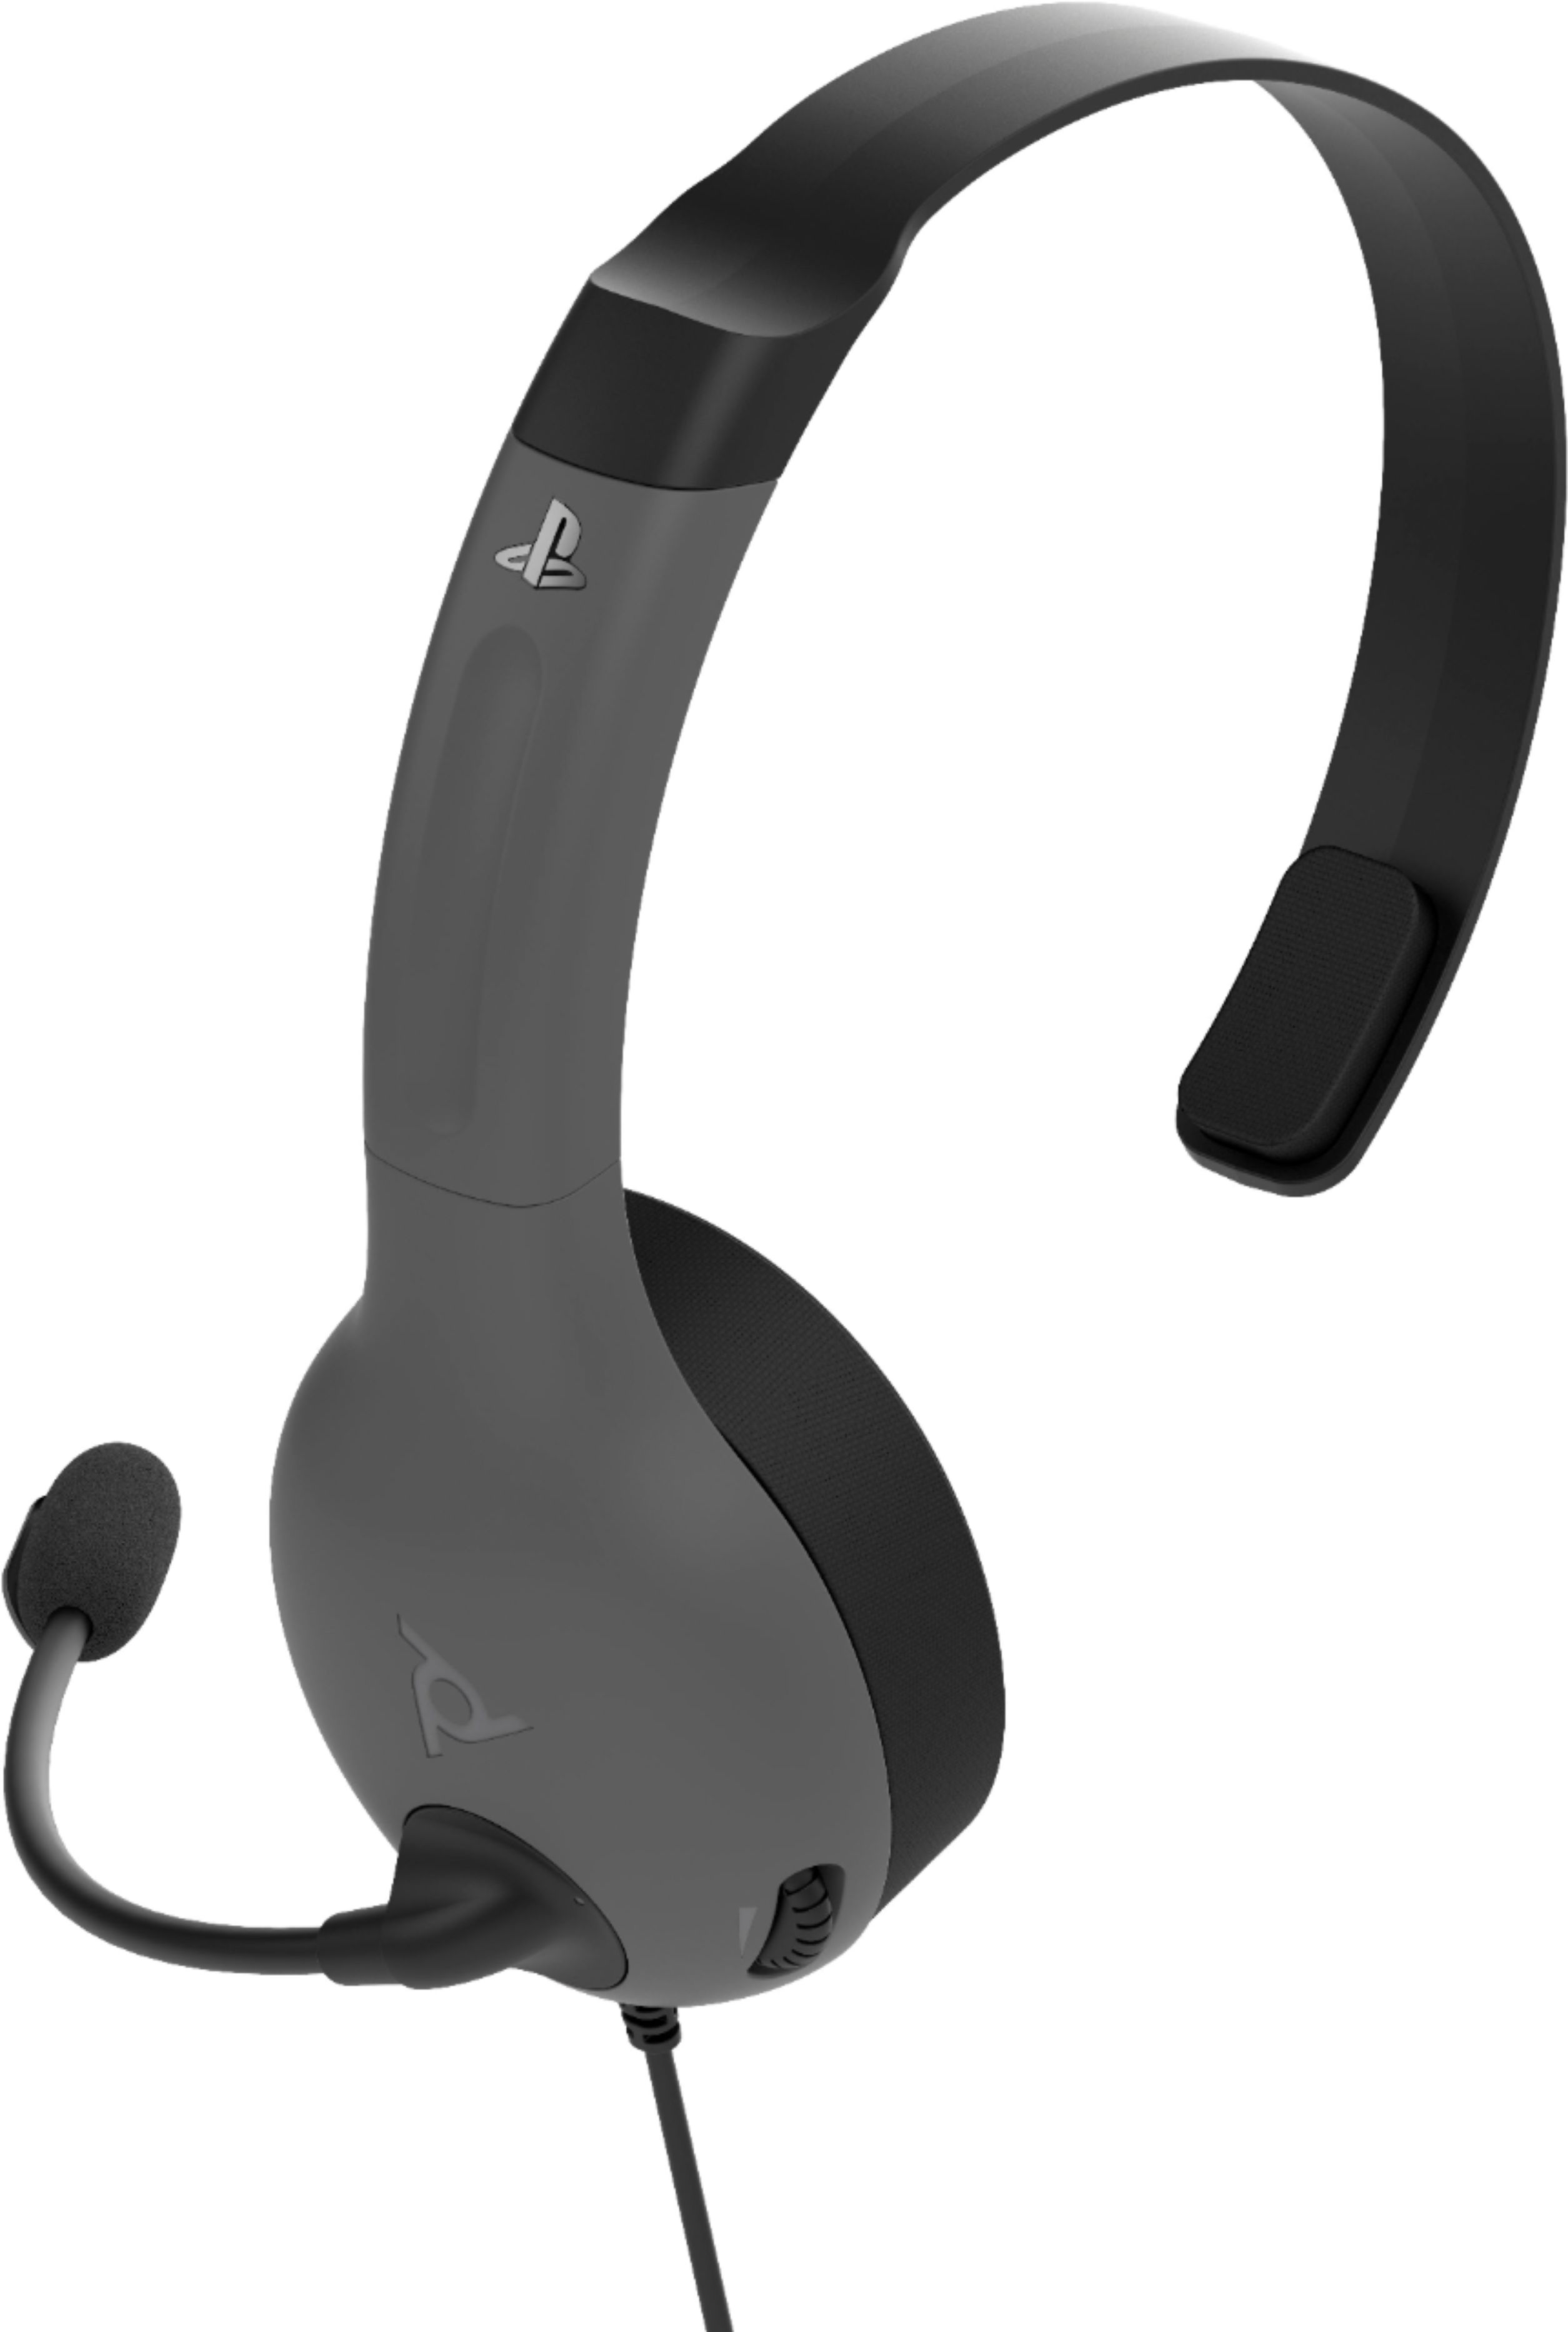 Best Buy: PDP LVL50 Wired Stereo Gaming Headset for PlayStation Black Black  051-099-NA-BK